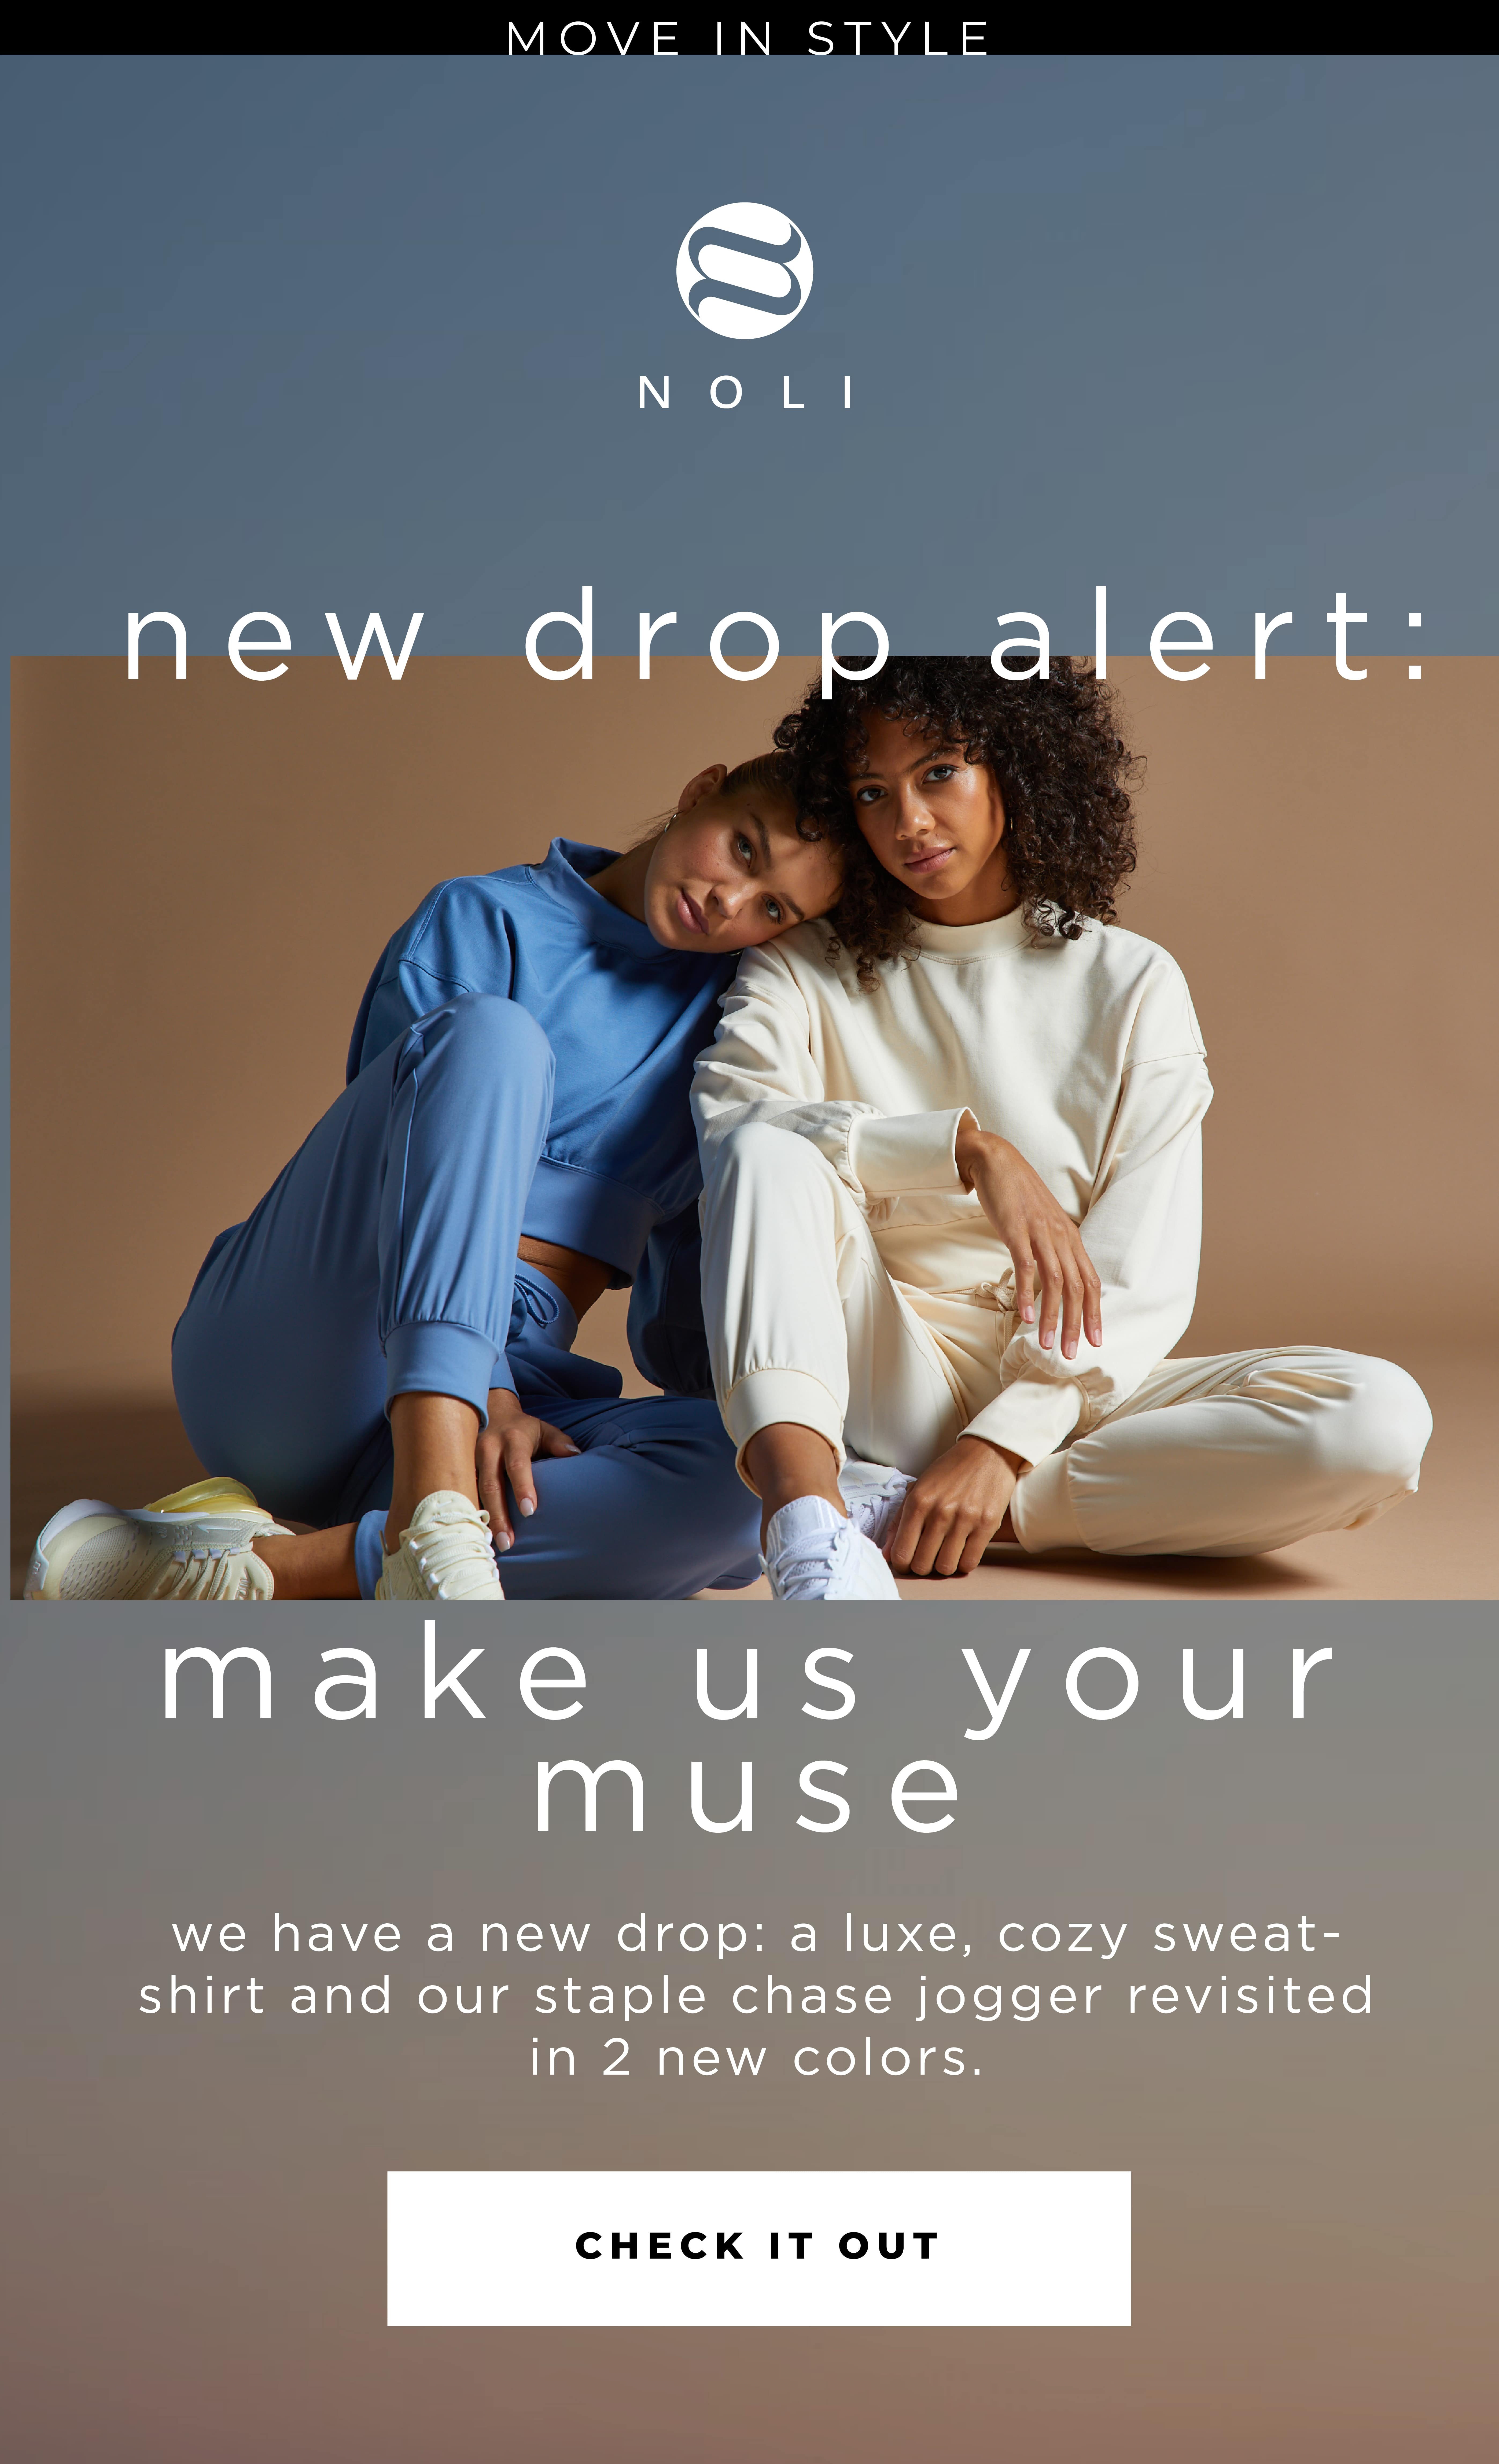 make us your muse, we have a new drop! cozy sweats available now